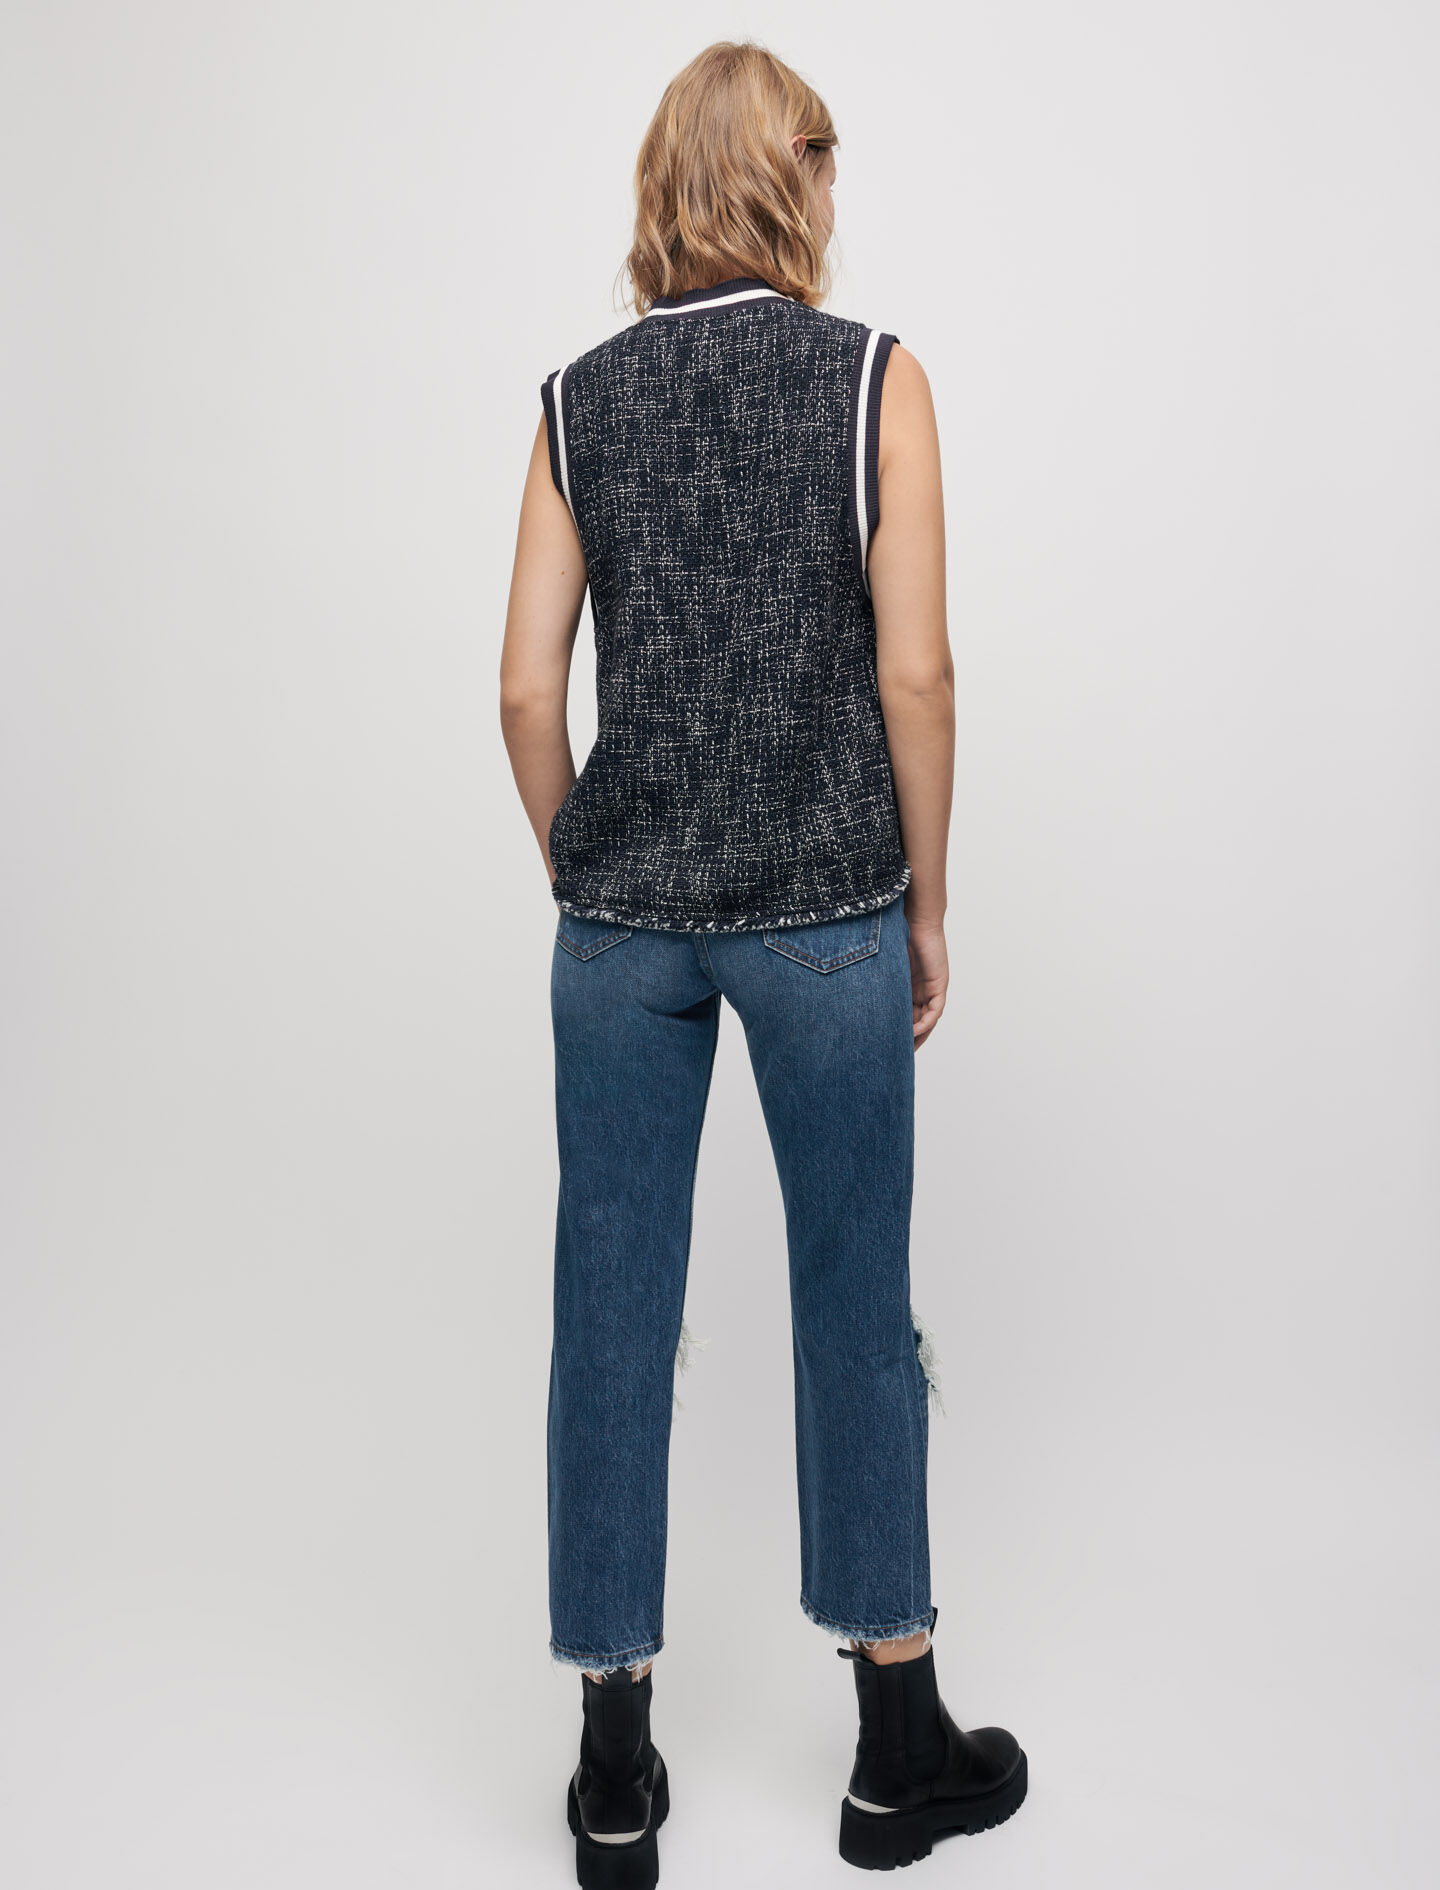 121LILAGA Tweed-style top with contrasting bands